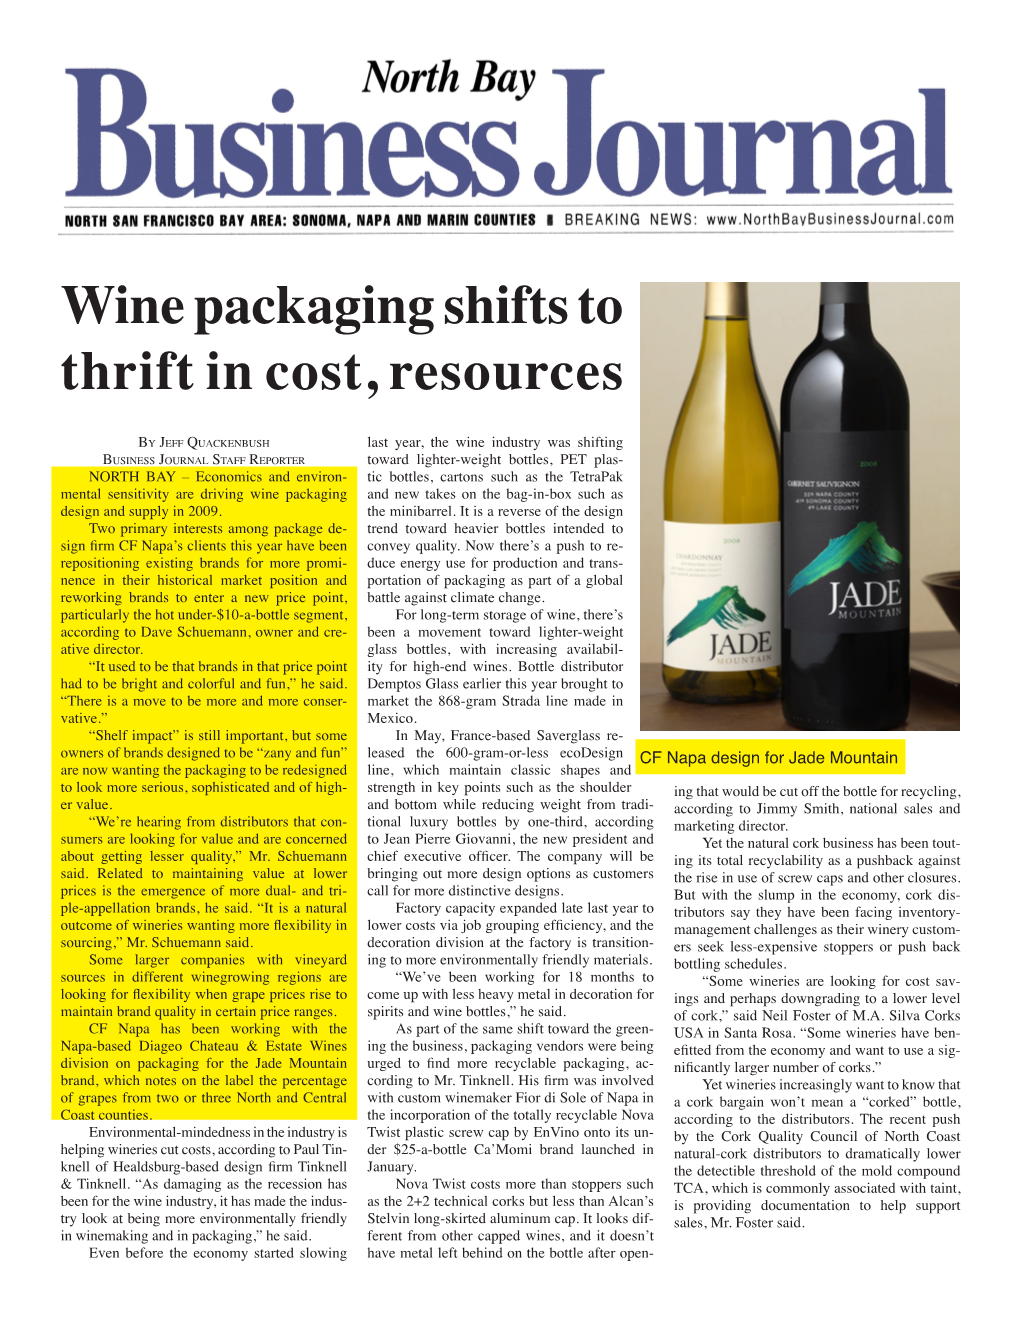 Wine Packaging Shifts to Thrift in Cost, Resources